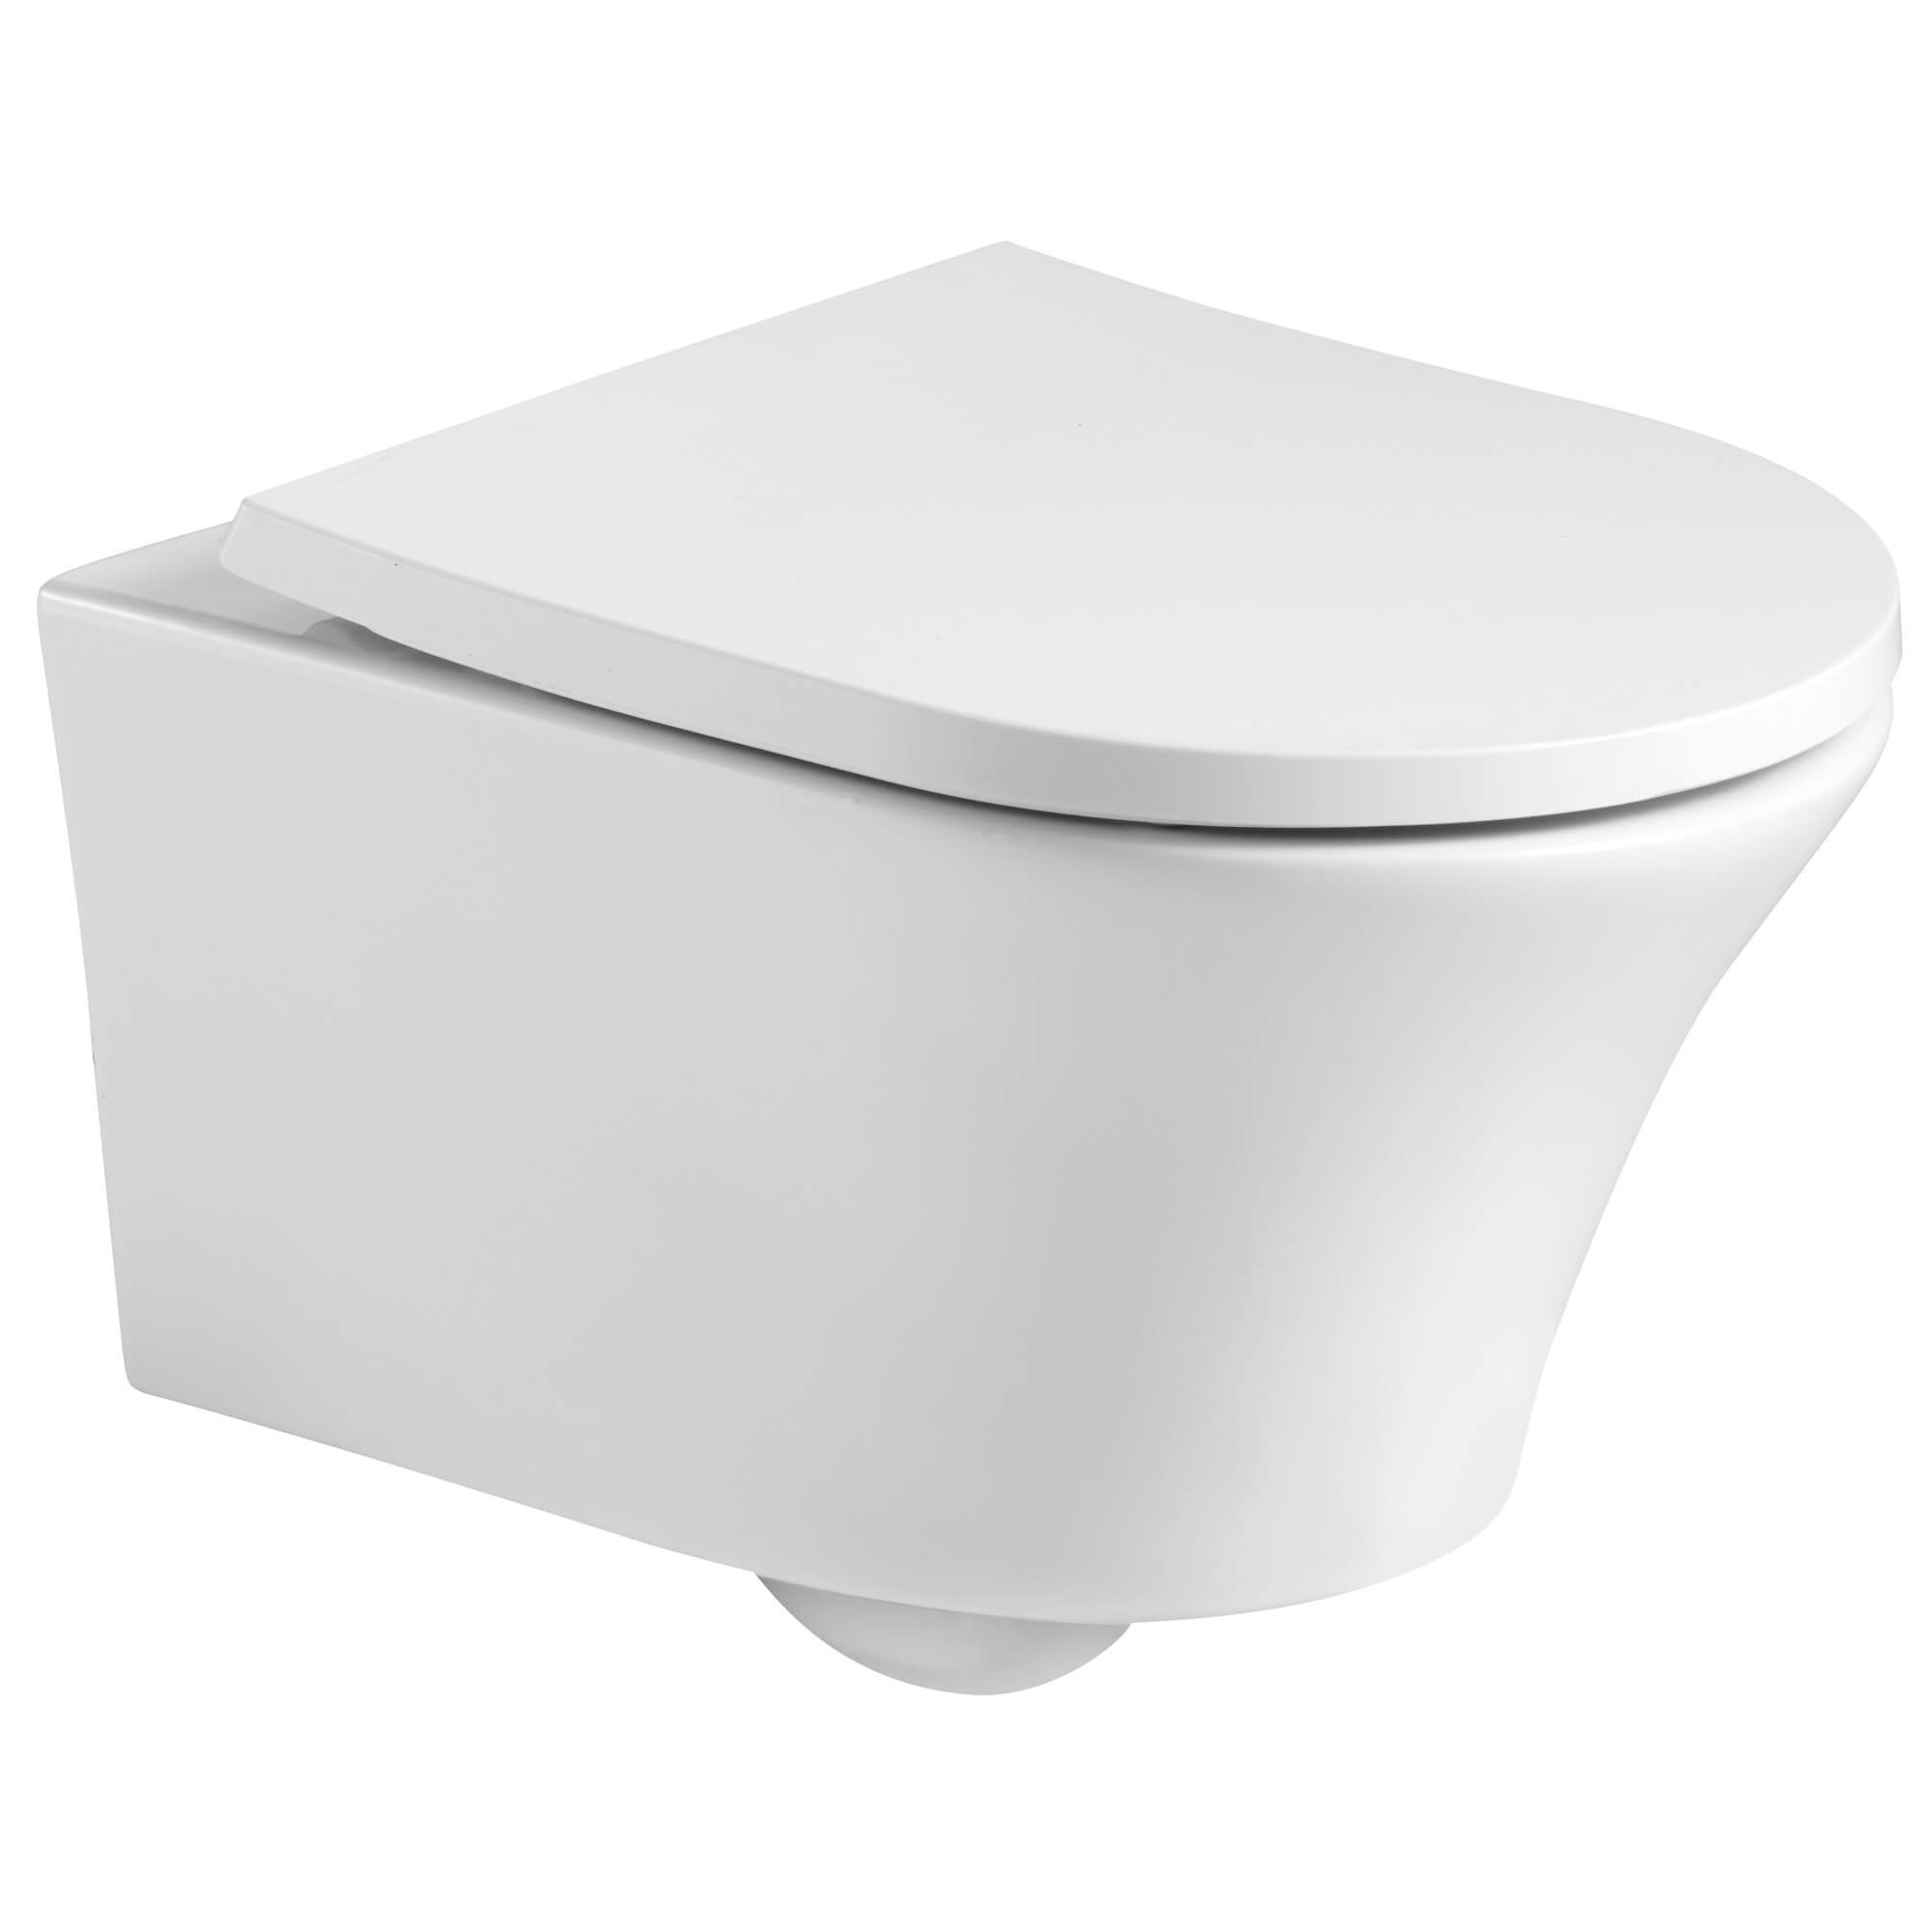 Kartell Wall Hung Pan Toilet Wall Frame inc cistern modern round deluxe premium 